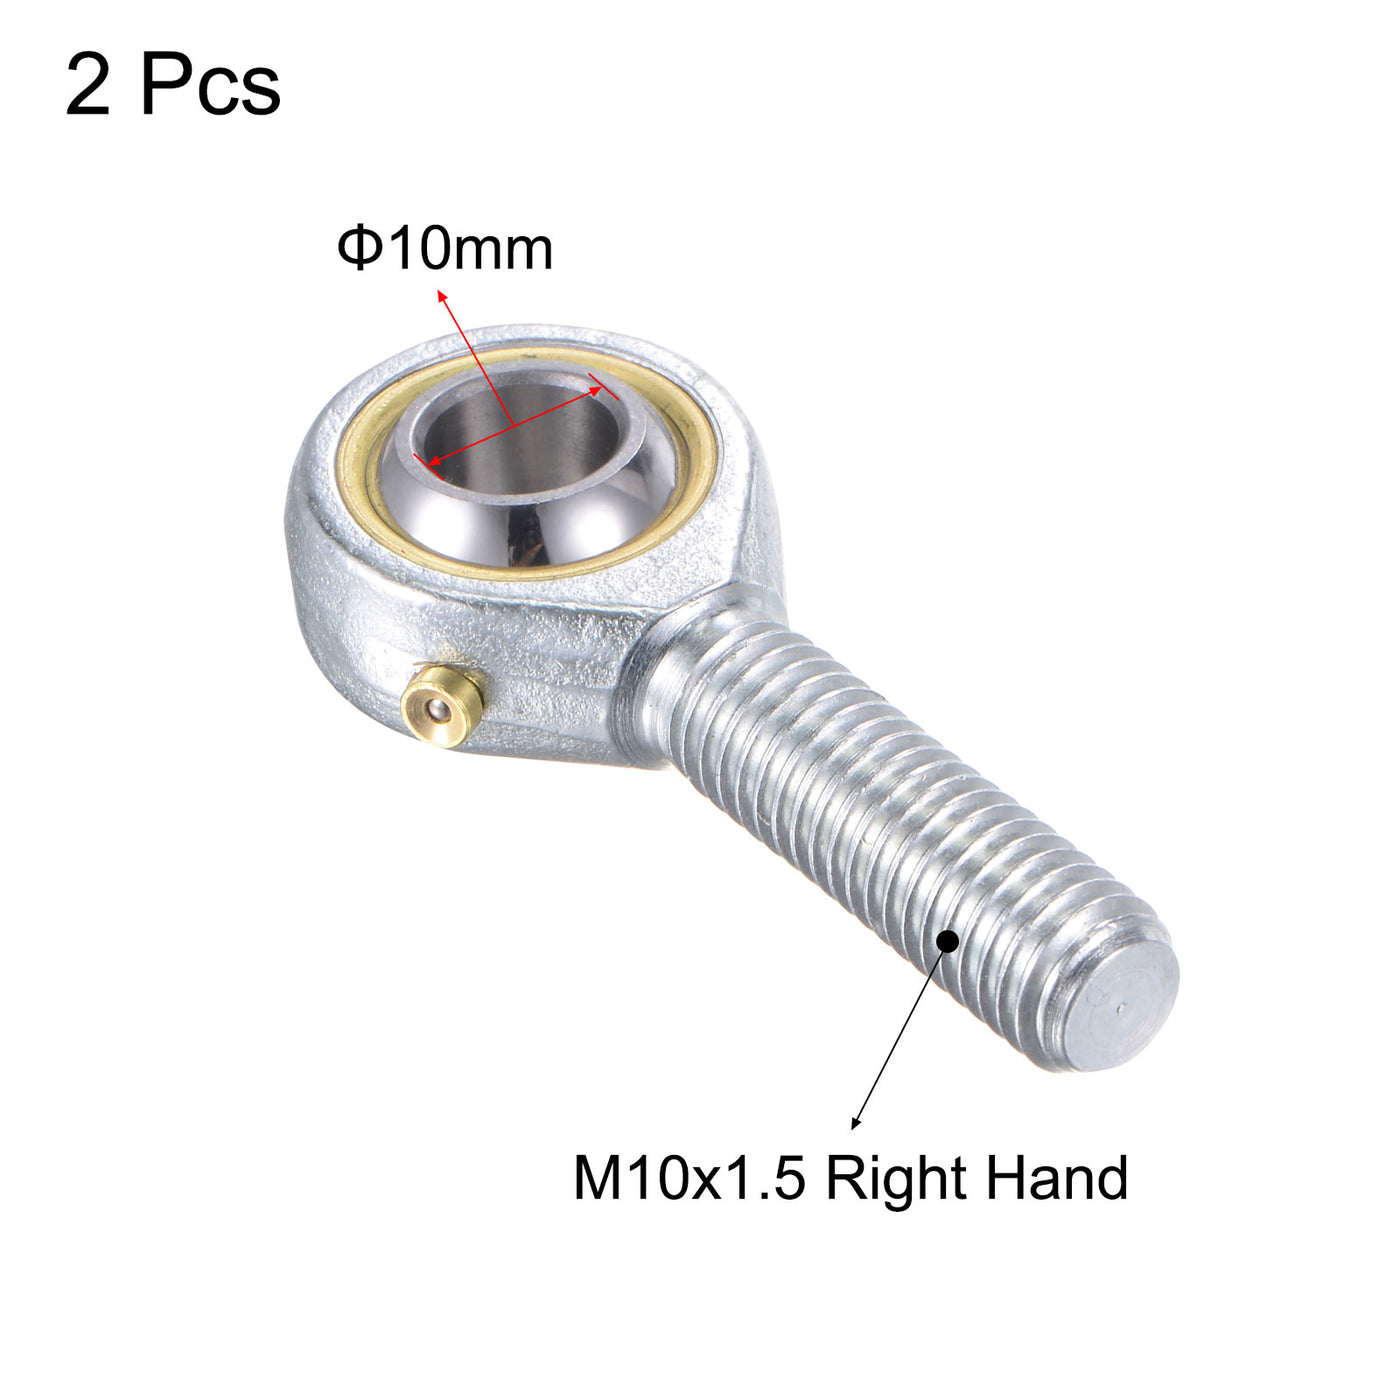 uxcell Uxcell 2pcs POS10 Rod End Bearing 10mm Bore Self-lubricated M10 Right Hand Male Thread